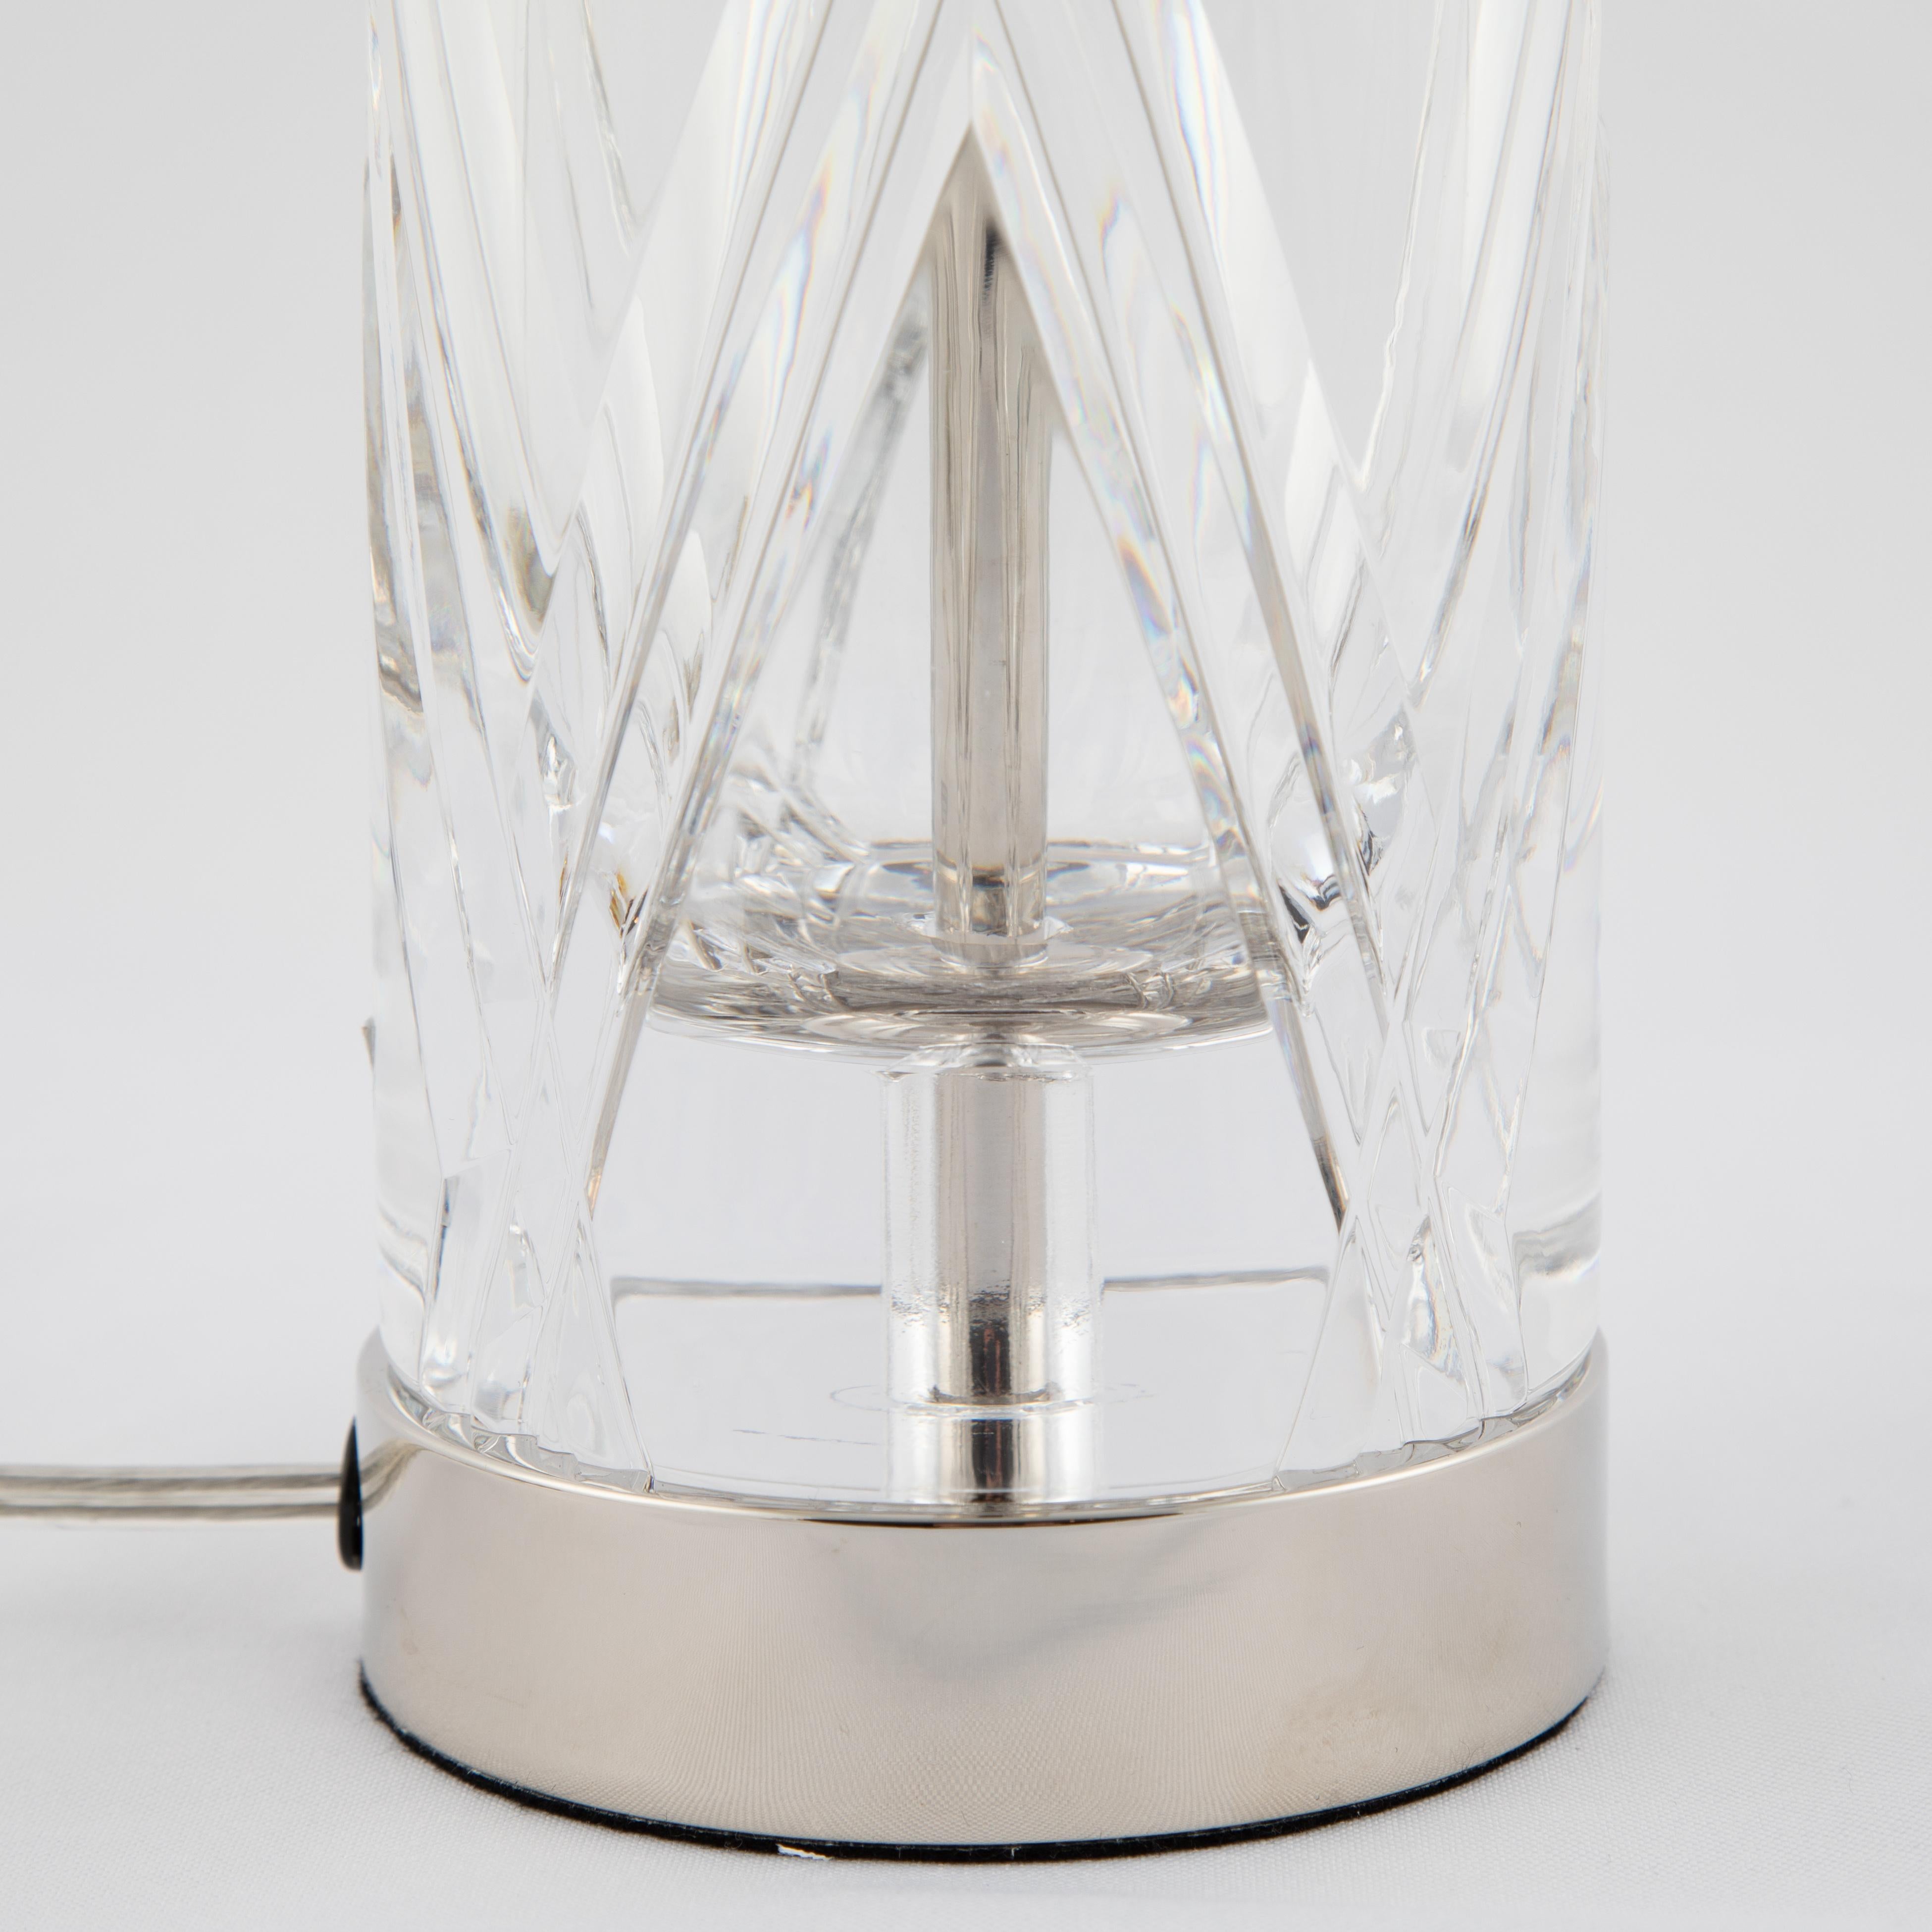 Olle Alberius for Orrefors Handcut Crystal Table Lamps, circa 1970s For Sale 5